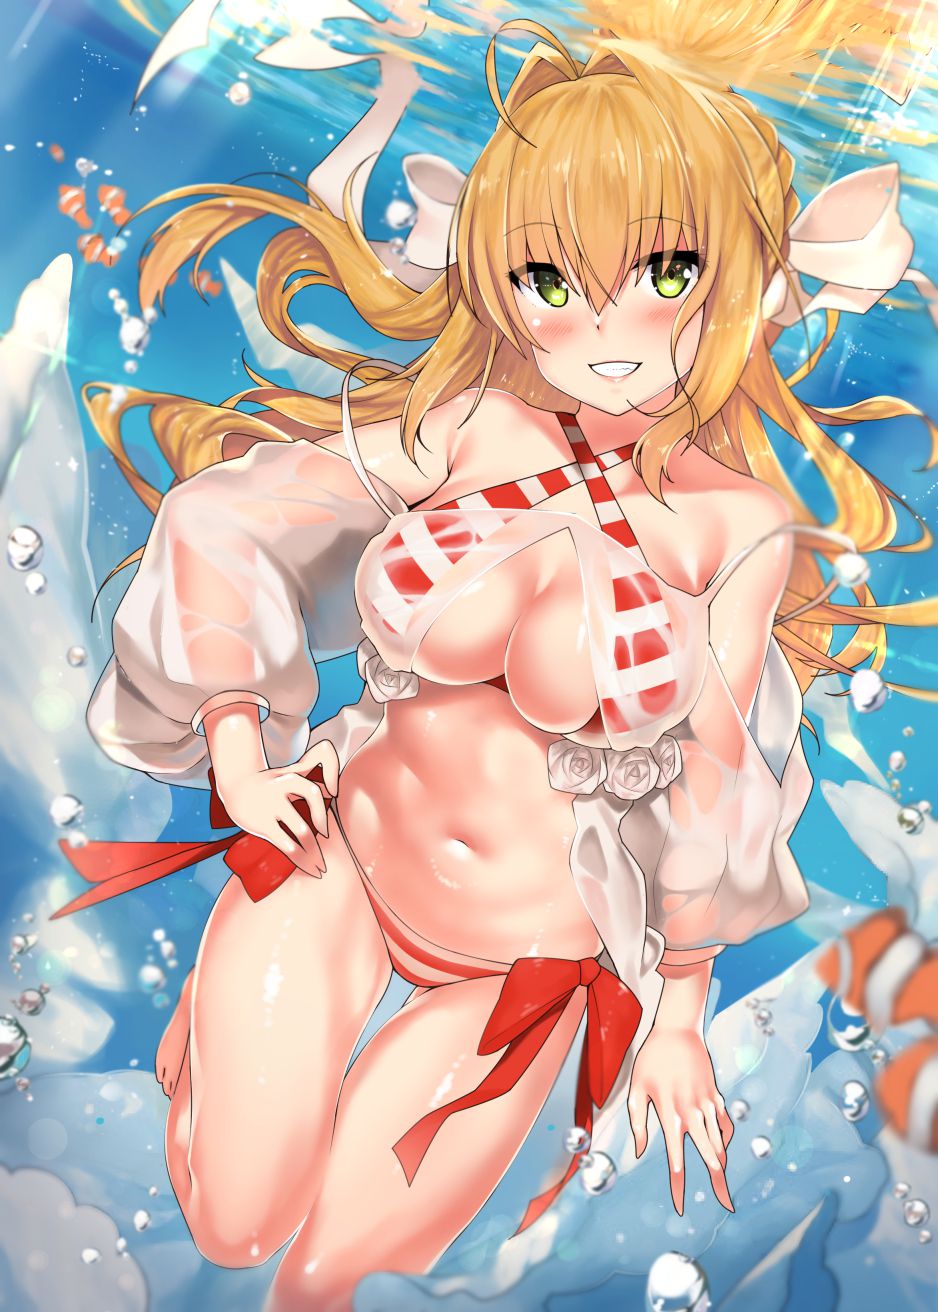 [Erotic anime summary] Assorted erotic images of FGO appearance servants are here [49 sheets] 44